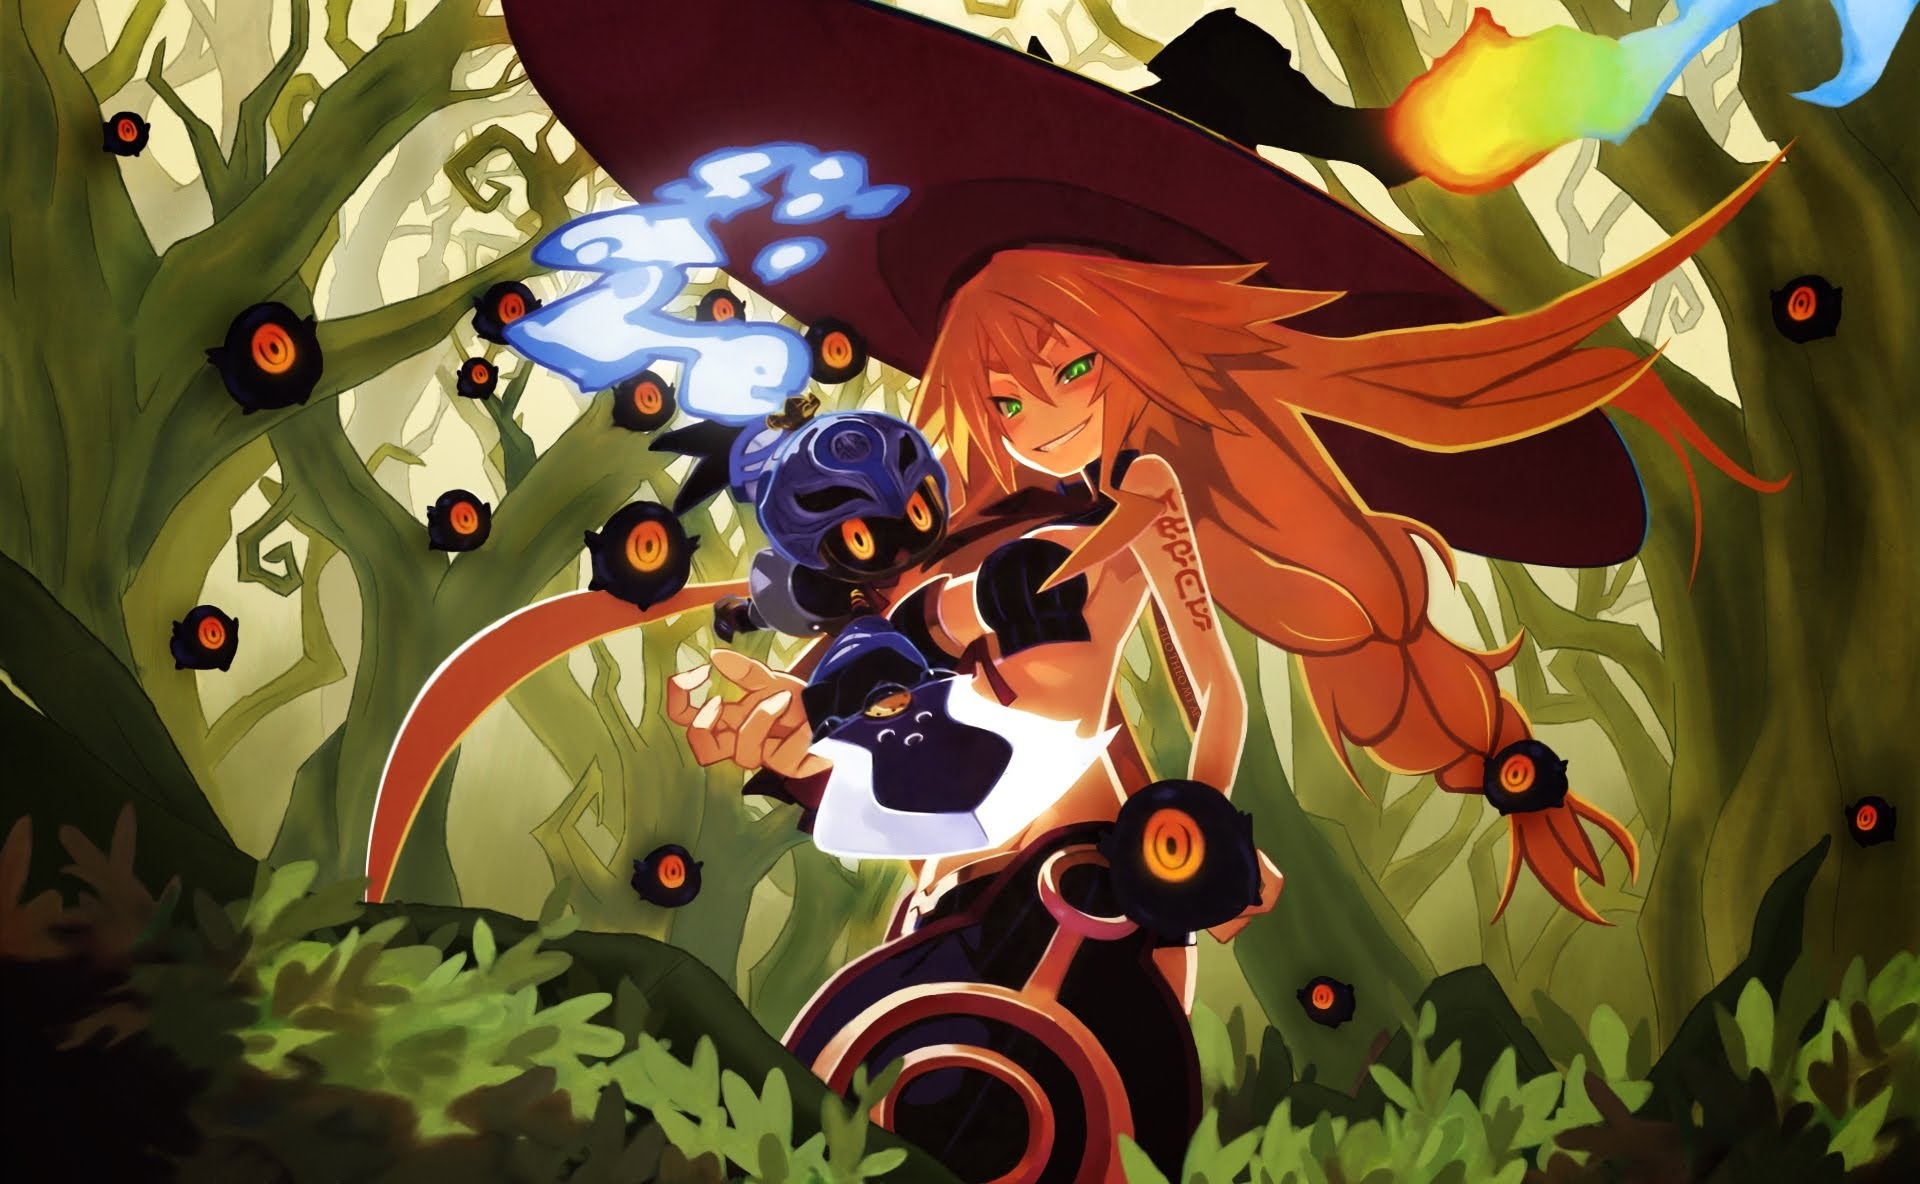 the witch and the hundred knight revival edition